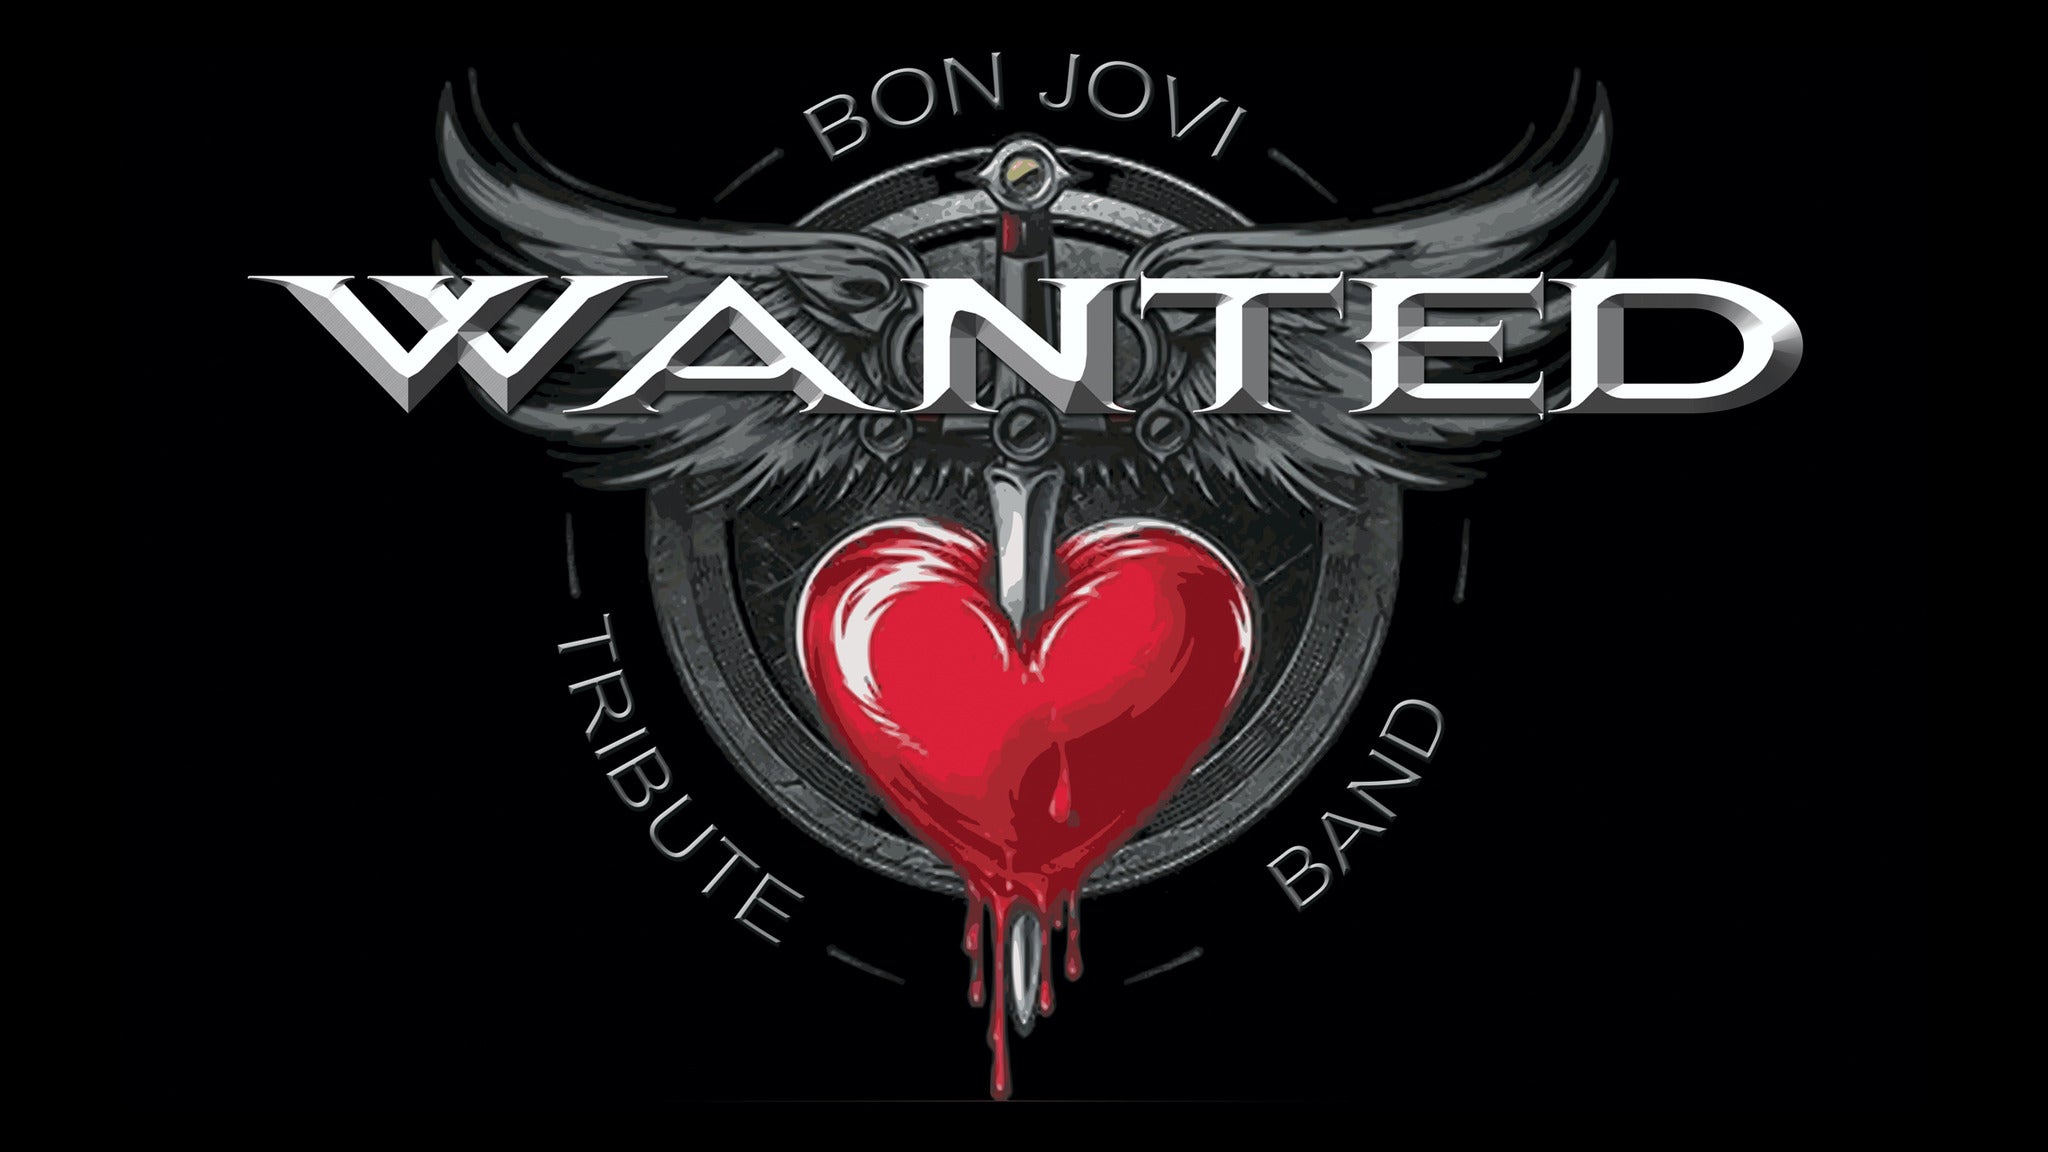 Wanted - Tribute To Bon Jovi in Cleveland promo photo for HOB Foundation Room Member presale offer code